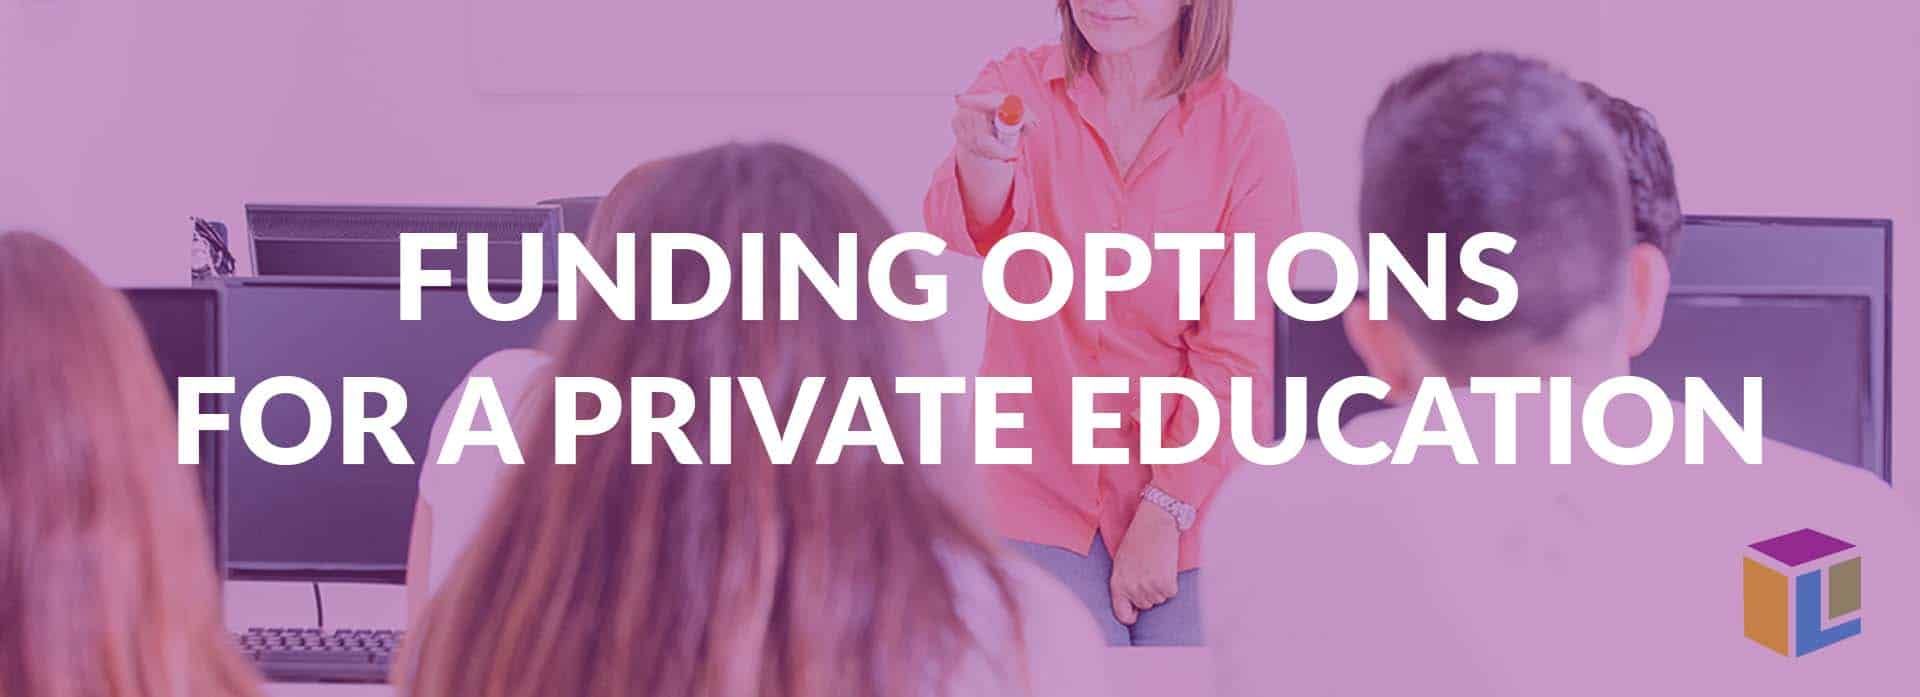 Funding Options For A Private Education Funding Options For A Private Education Funding Options For A Private Education Funding Options For A Private Education